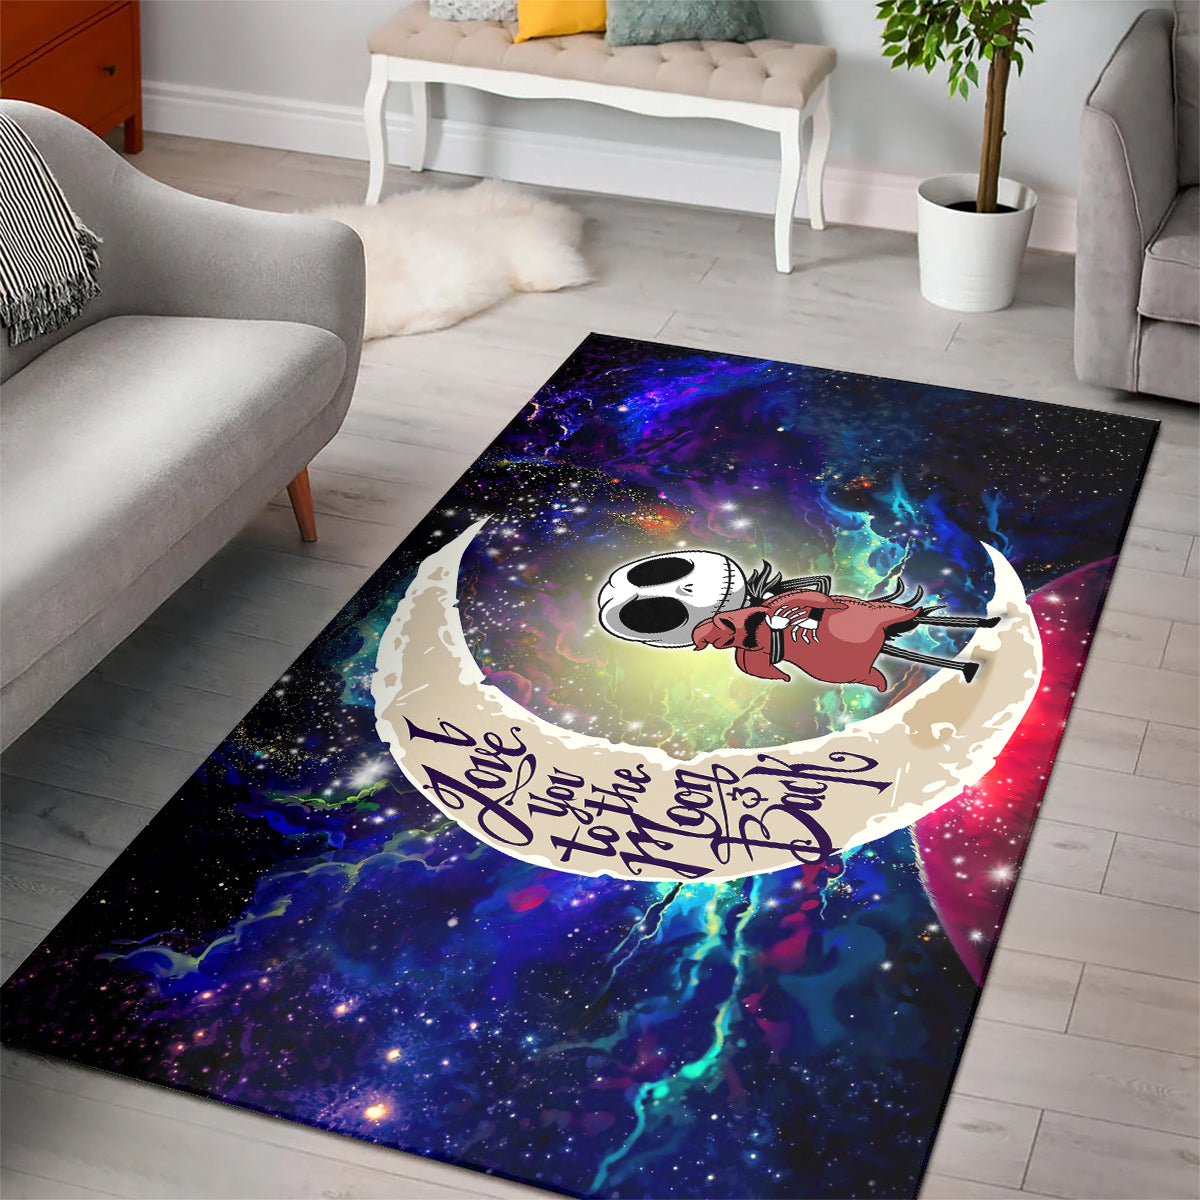 Jack Skellington Nightmare Before Christmas Love You To The Moon Galaxy Carpet Rug Home Room Decor